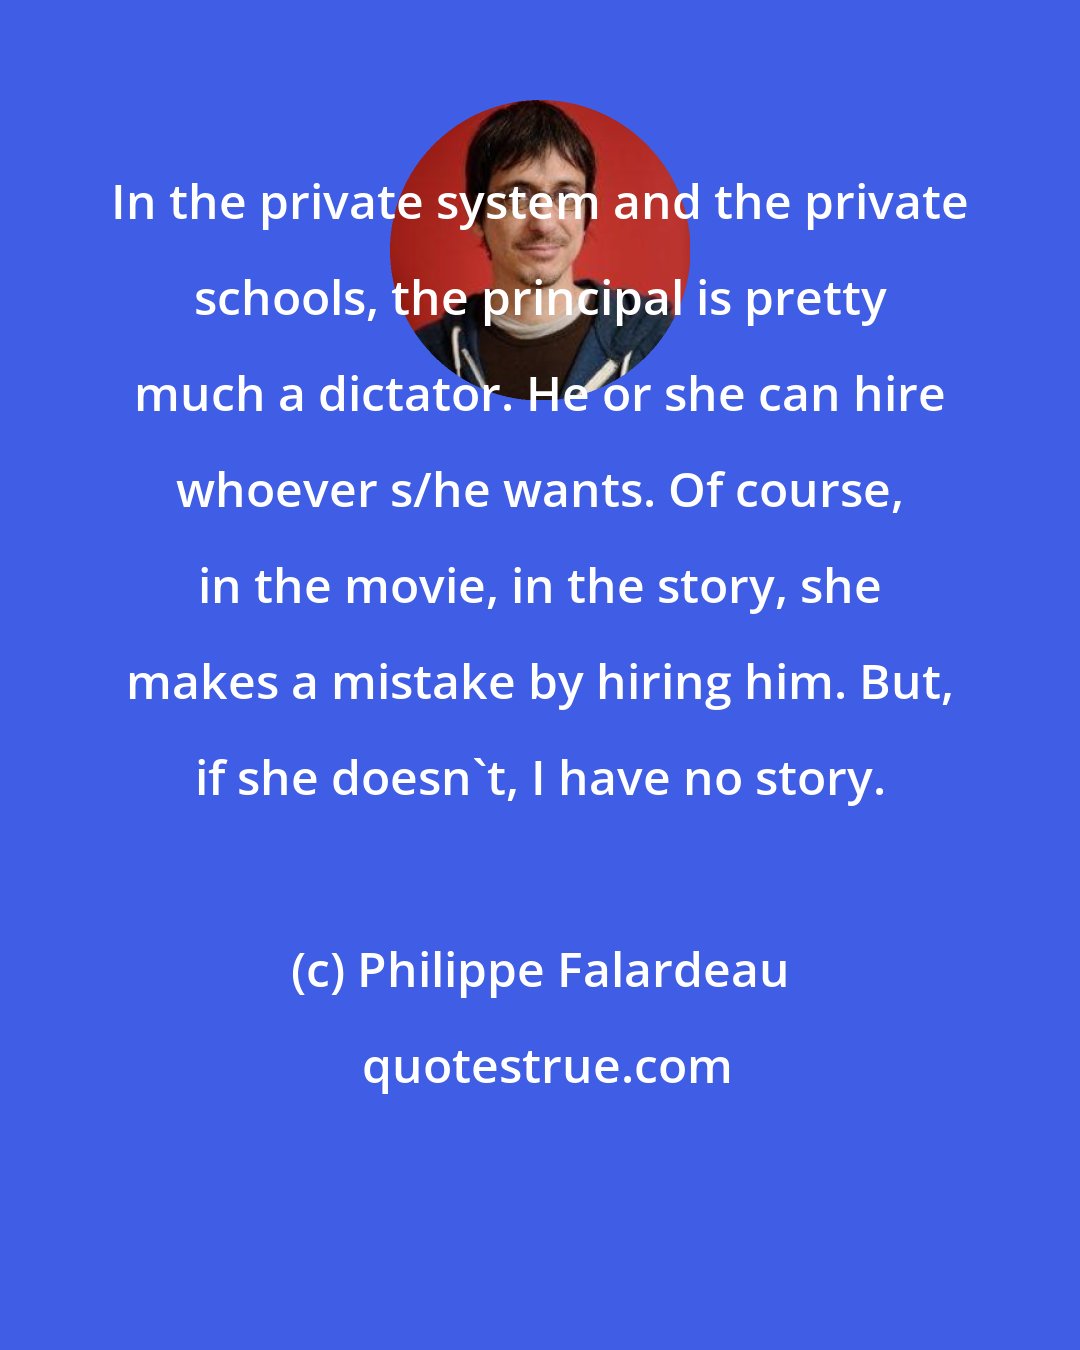 Philippe Falardeau: In the private system and the private schools, the principal is pretty much a dictator. He or she can hire whoever s/he wants. Of course, in the movie, in the story, she makes a mistake by hiring him. But, if she doesn't, I have no story.